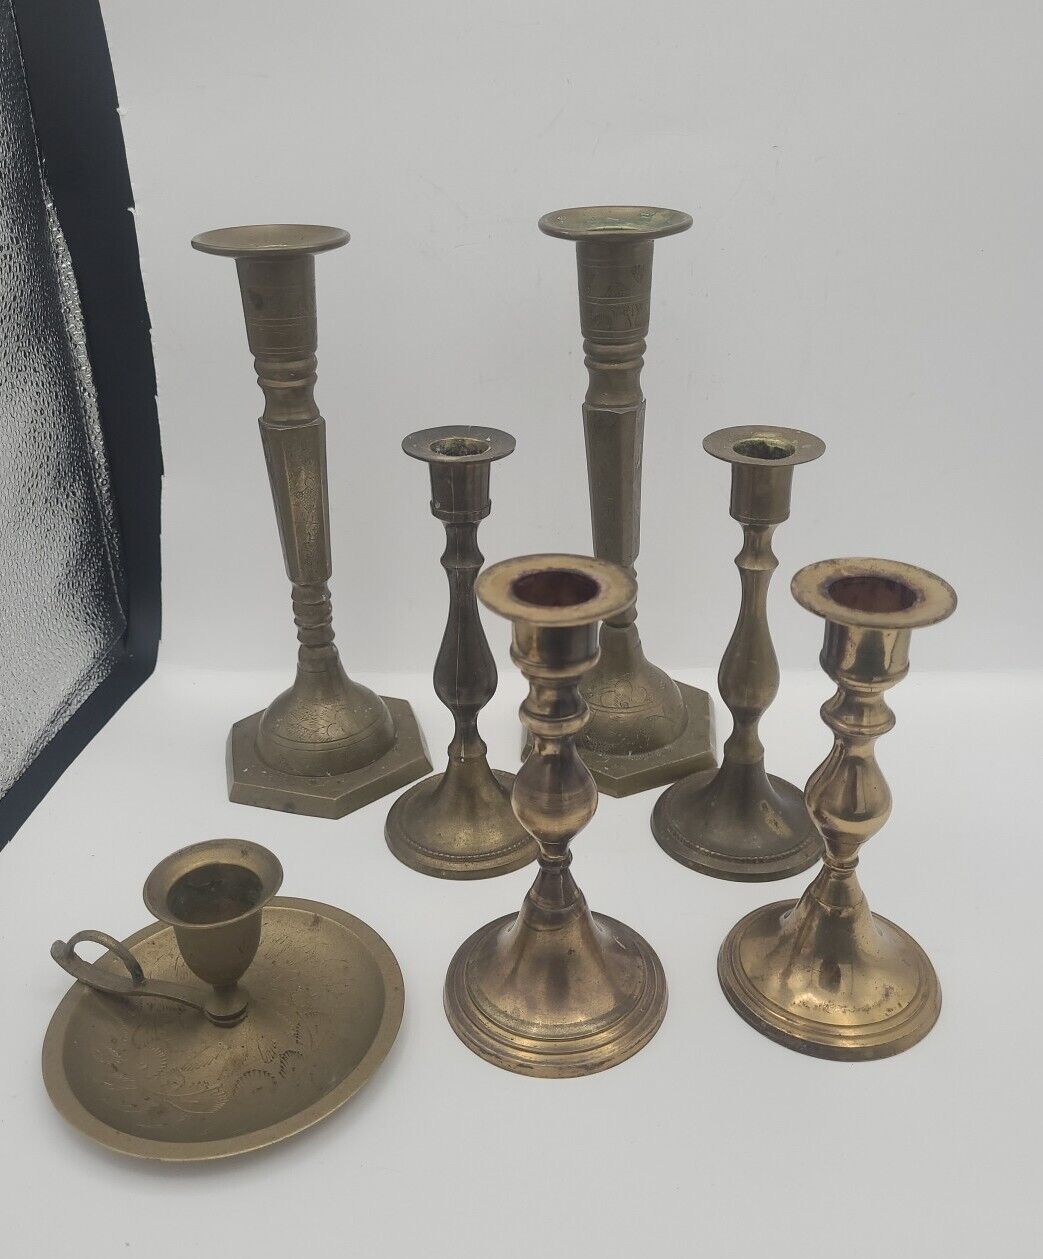 Mixed Lot of 7 Vintage Brass Candlesticks Holders Patina/Cond/Size Varies